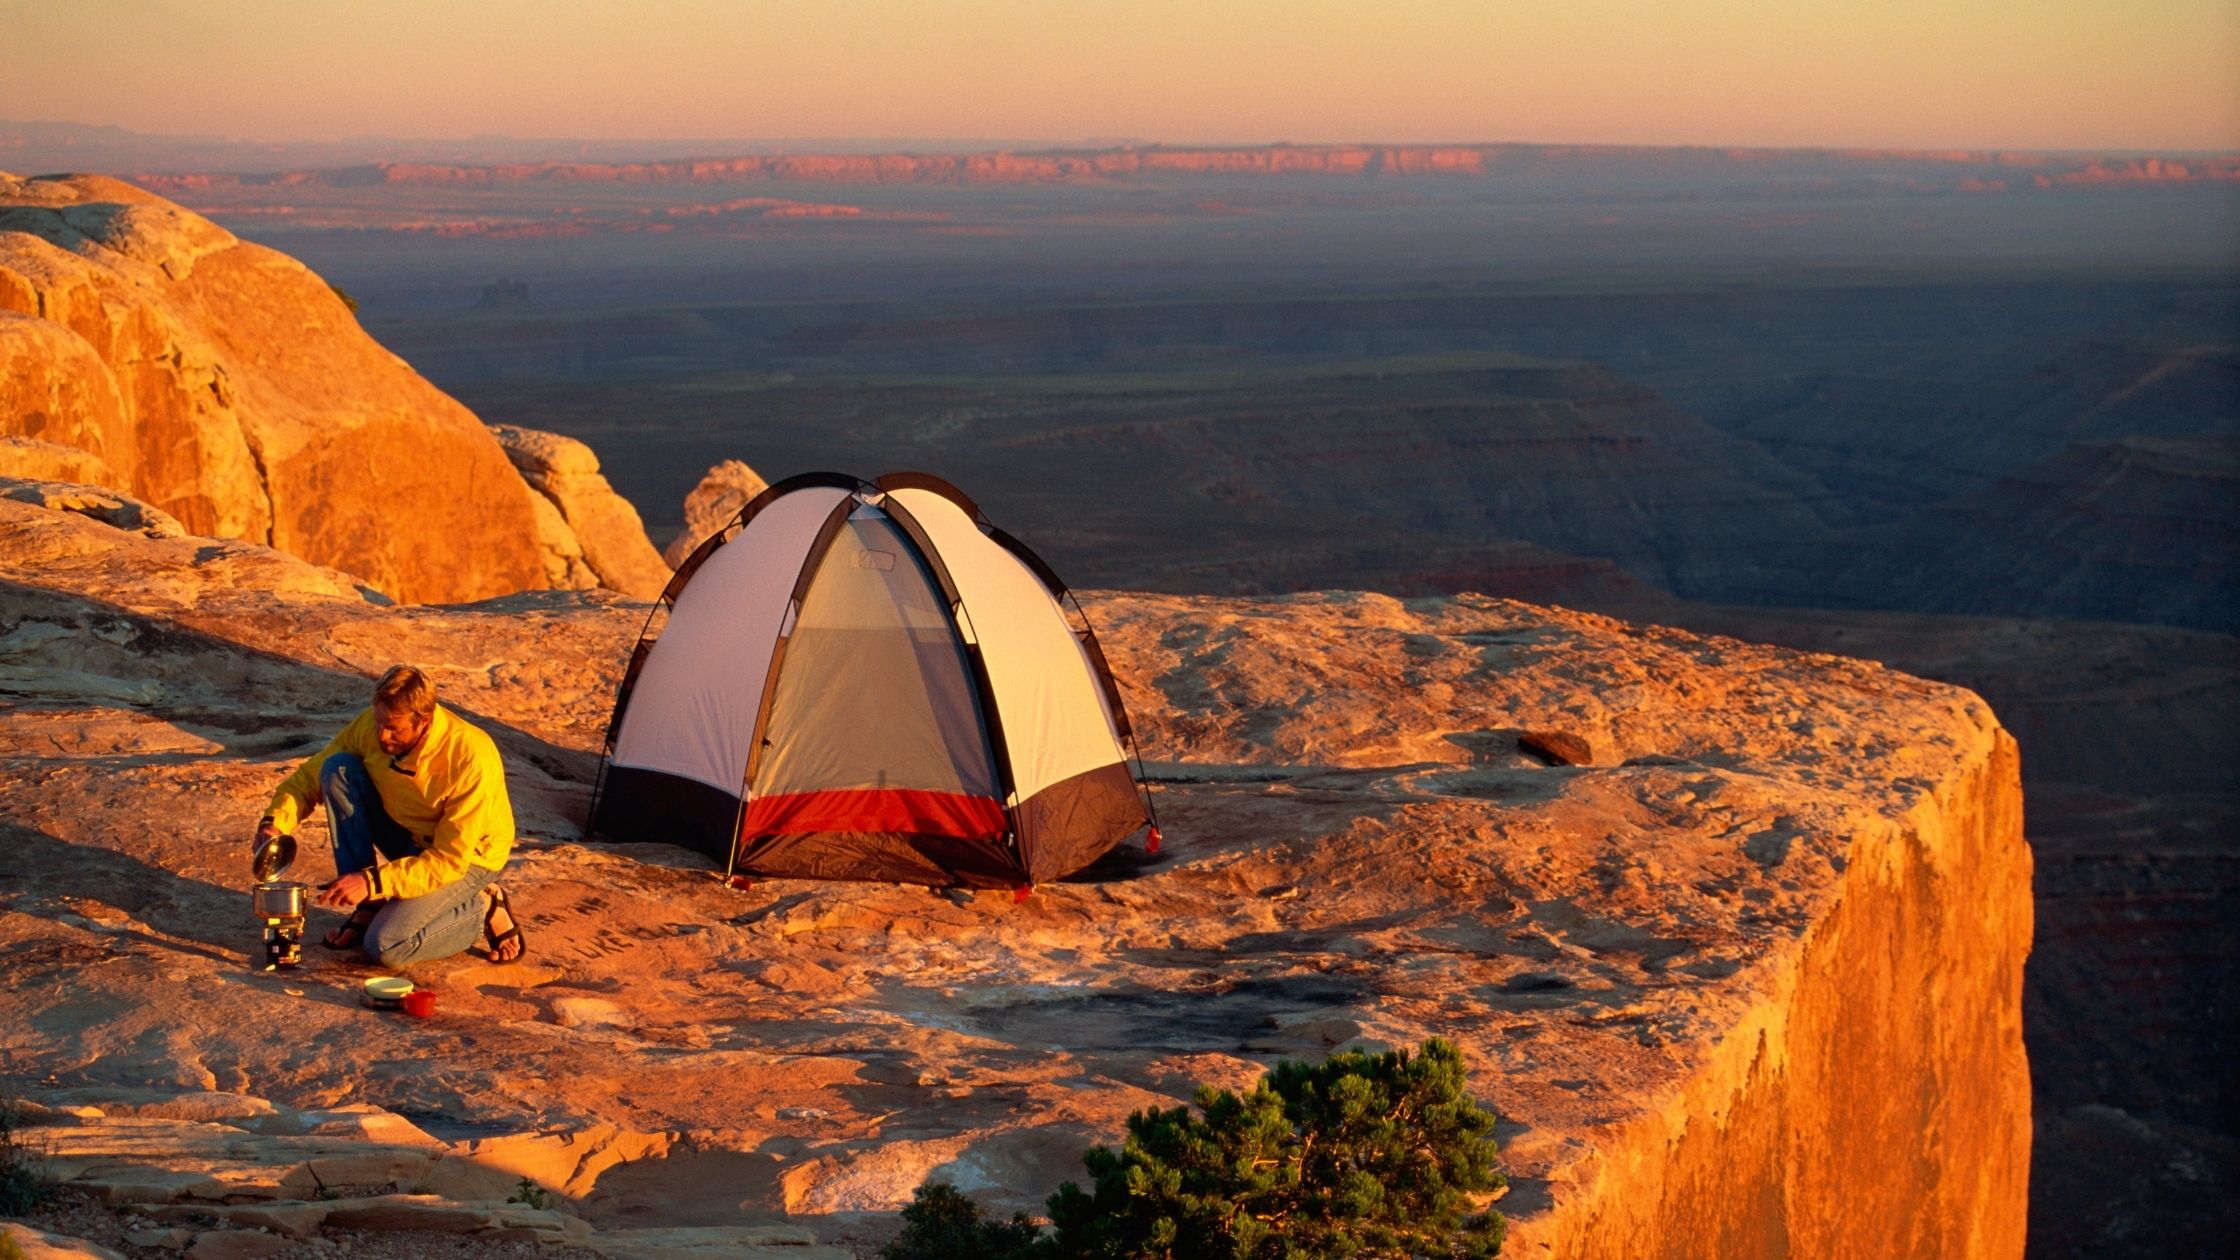 Can You Rent Camping Gear?